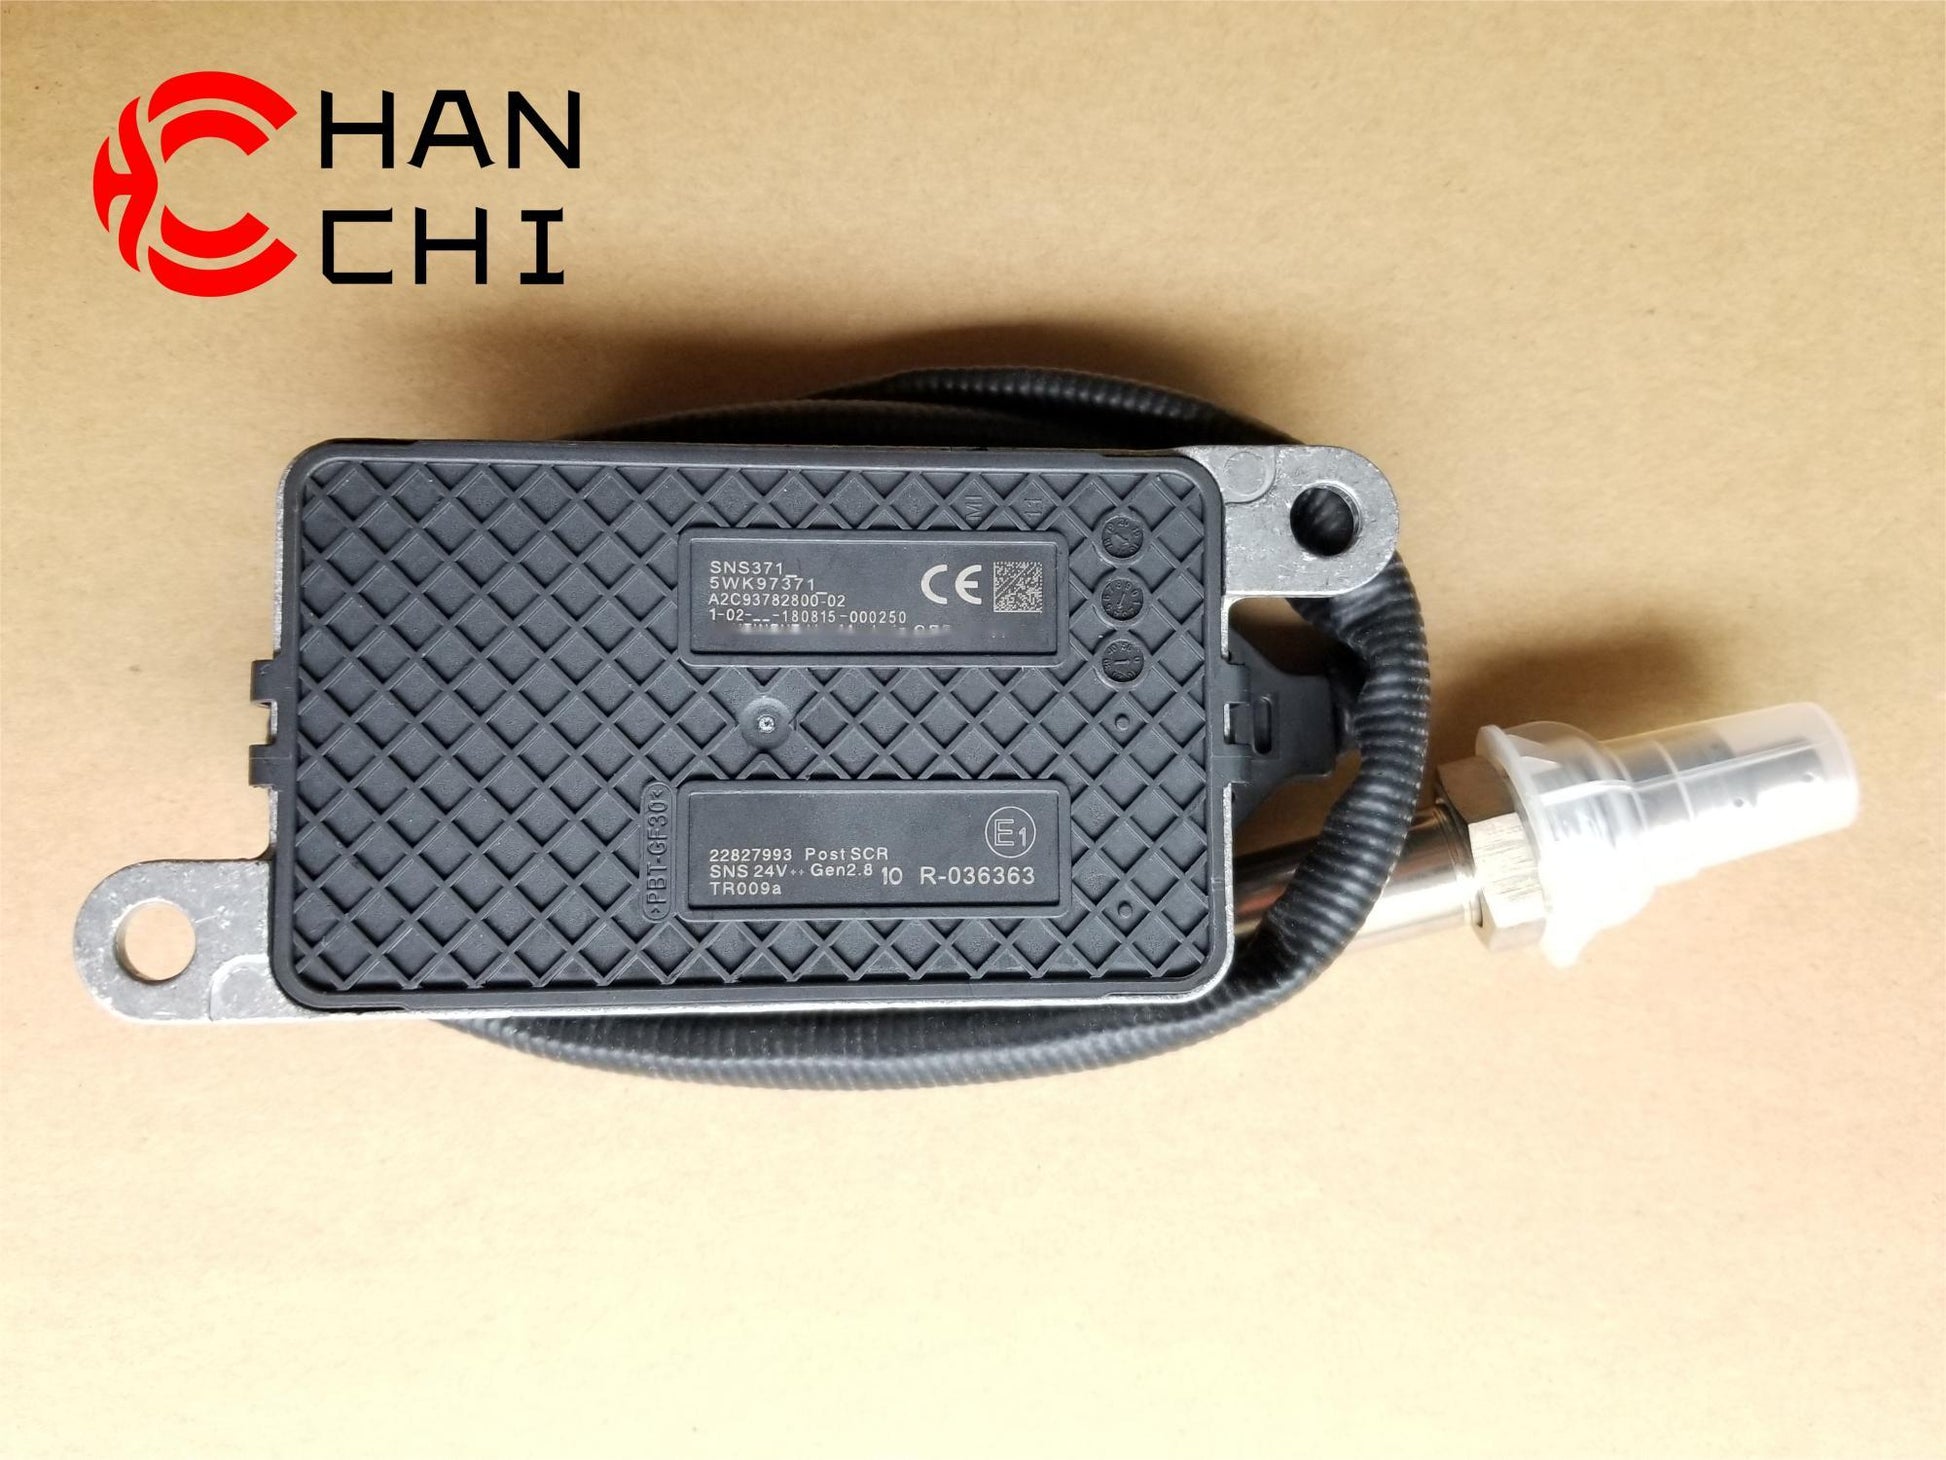 OEM: 5WK97371 22827993 Material: ABS metal Color: black silver Origin: Made in China Weight: 400g Packing List: 1*  Nitrogen oxide sensor NOx  More Service We can provide OEM Manufacturing service We can Be your one-step solution for Auto Parts We can provide technical scheme for you  Feel Free to Contact Us, We will get back to you as soon as possible.